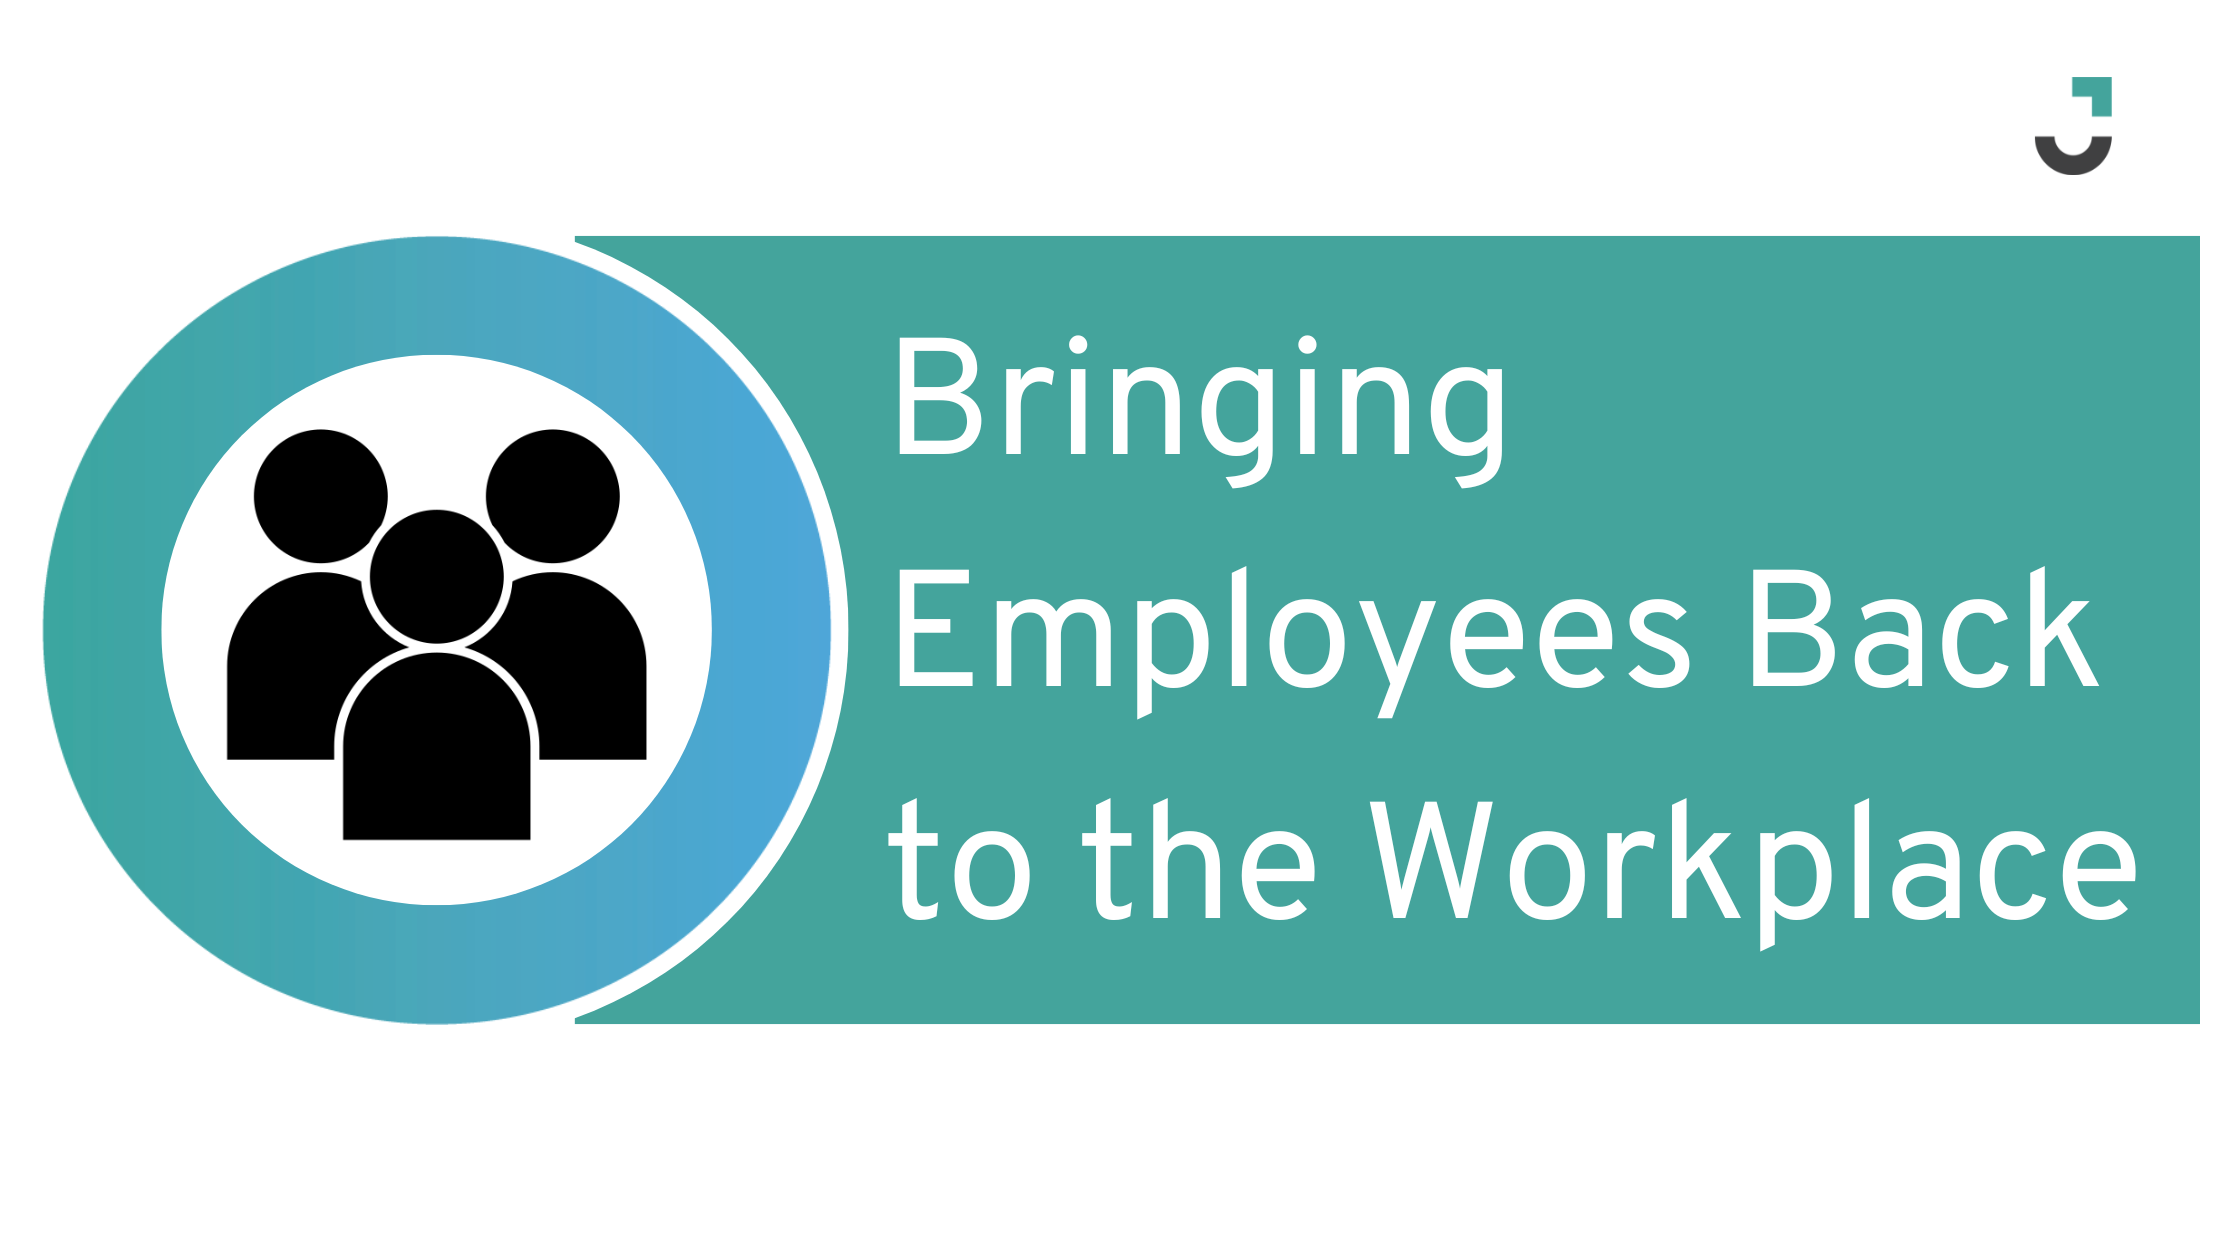 Bringing Employees Back to the Workplace